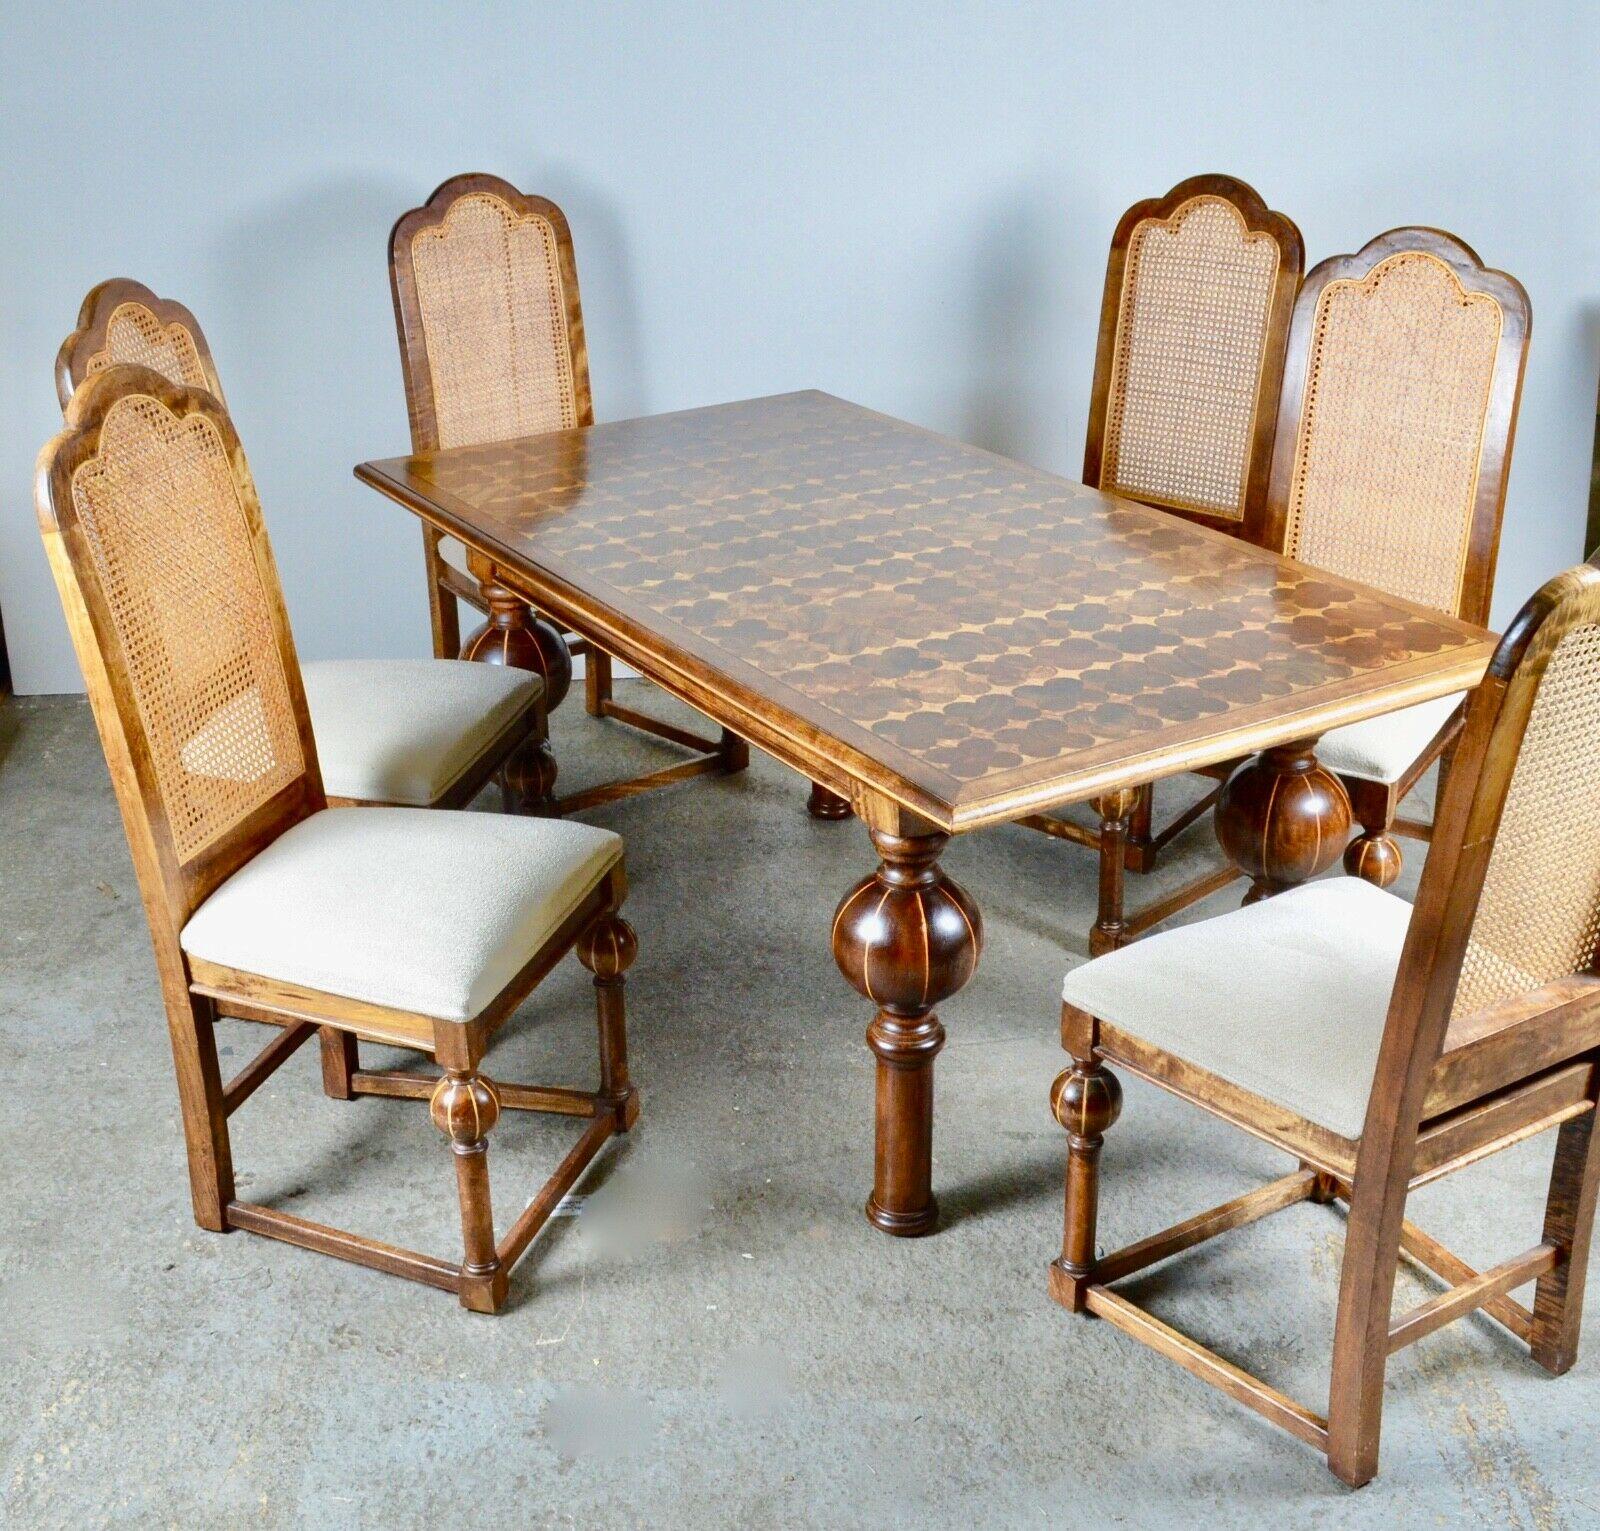 Hardwood Stunning Walnut Parquetry Inlaid Dining Table and Set of 6 Chairs, Bulbous Legs For Sale